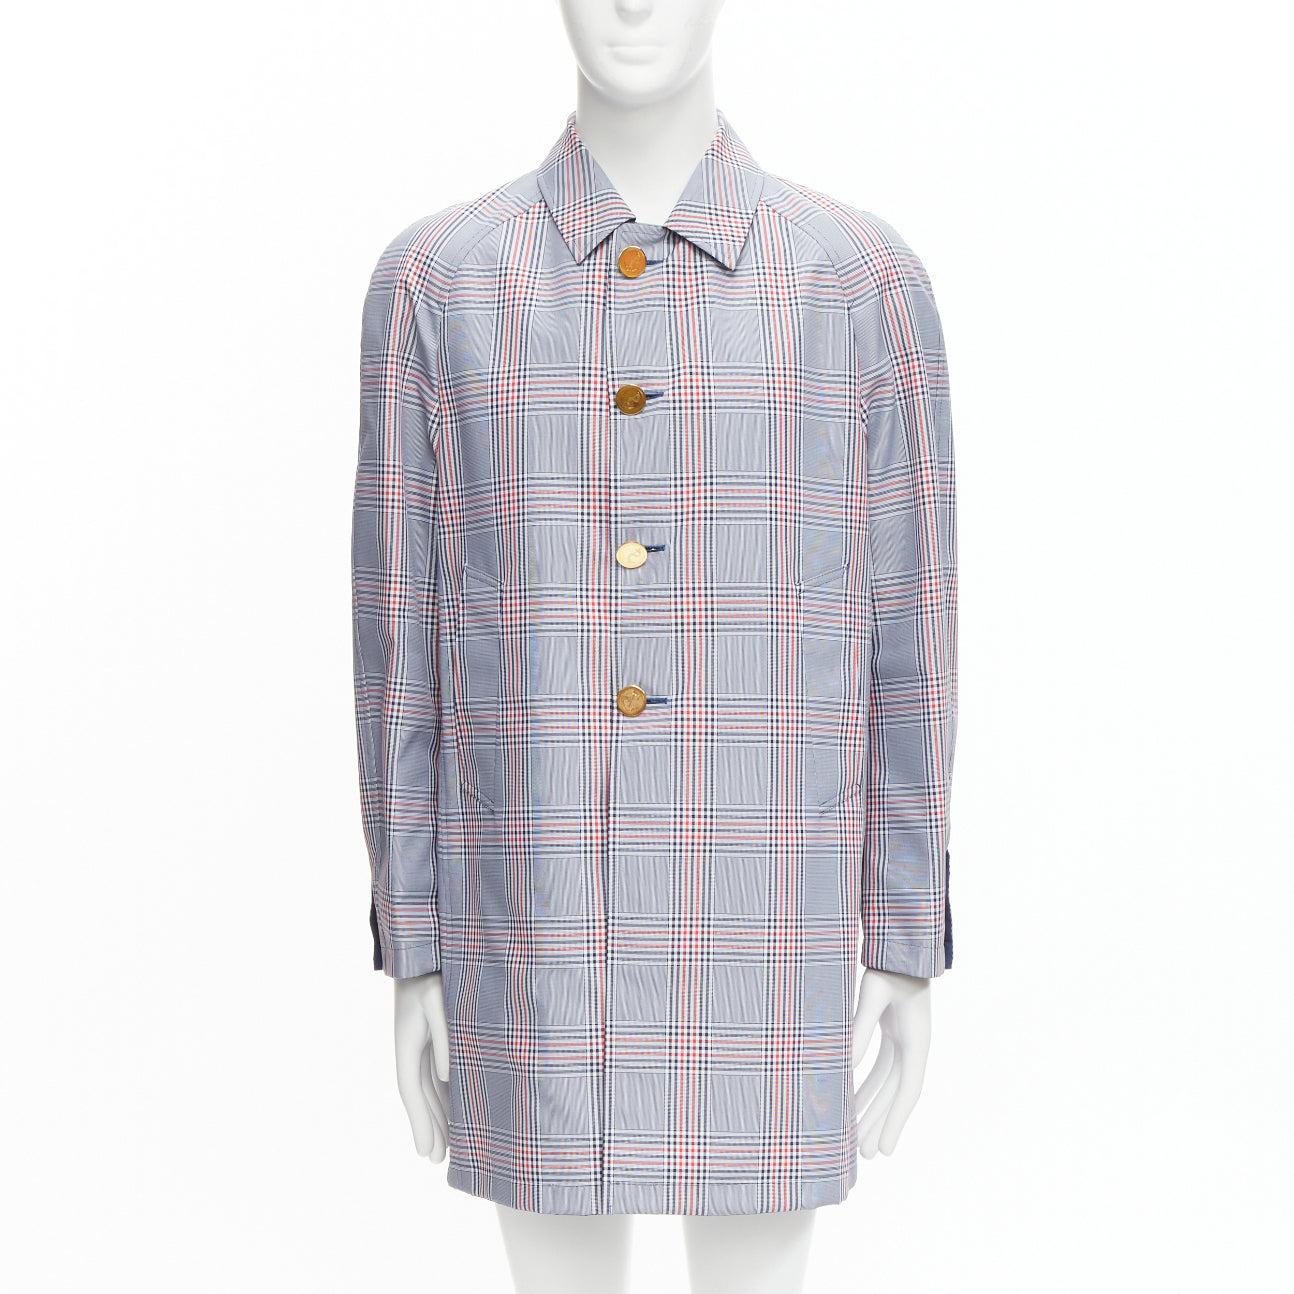 THOM BROWNE Reversible navy blue classic check gold buttons overcoat JP2 M
Reference: JSLE/A00025
Brand: Thom Browne
Designer: Thom Browne
Material: Cotton, Blend
Color: Navy, Multicolour
Pattern: Checkered
Closure: Button
Lining: Blue Fabric
Extra